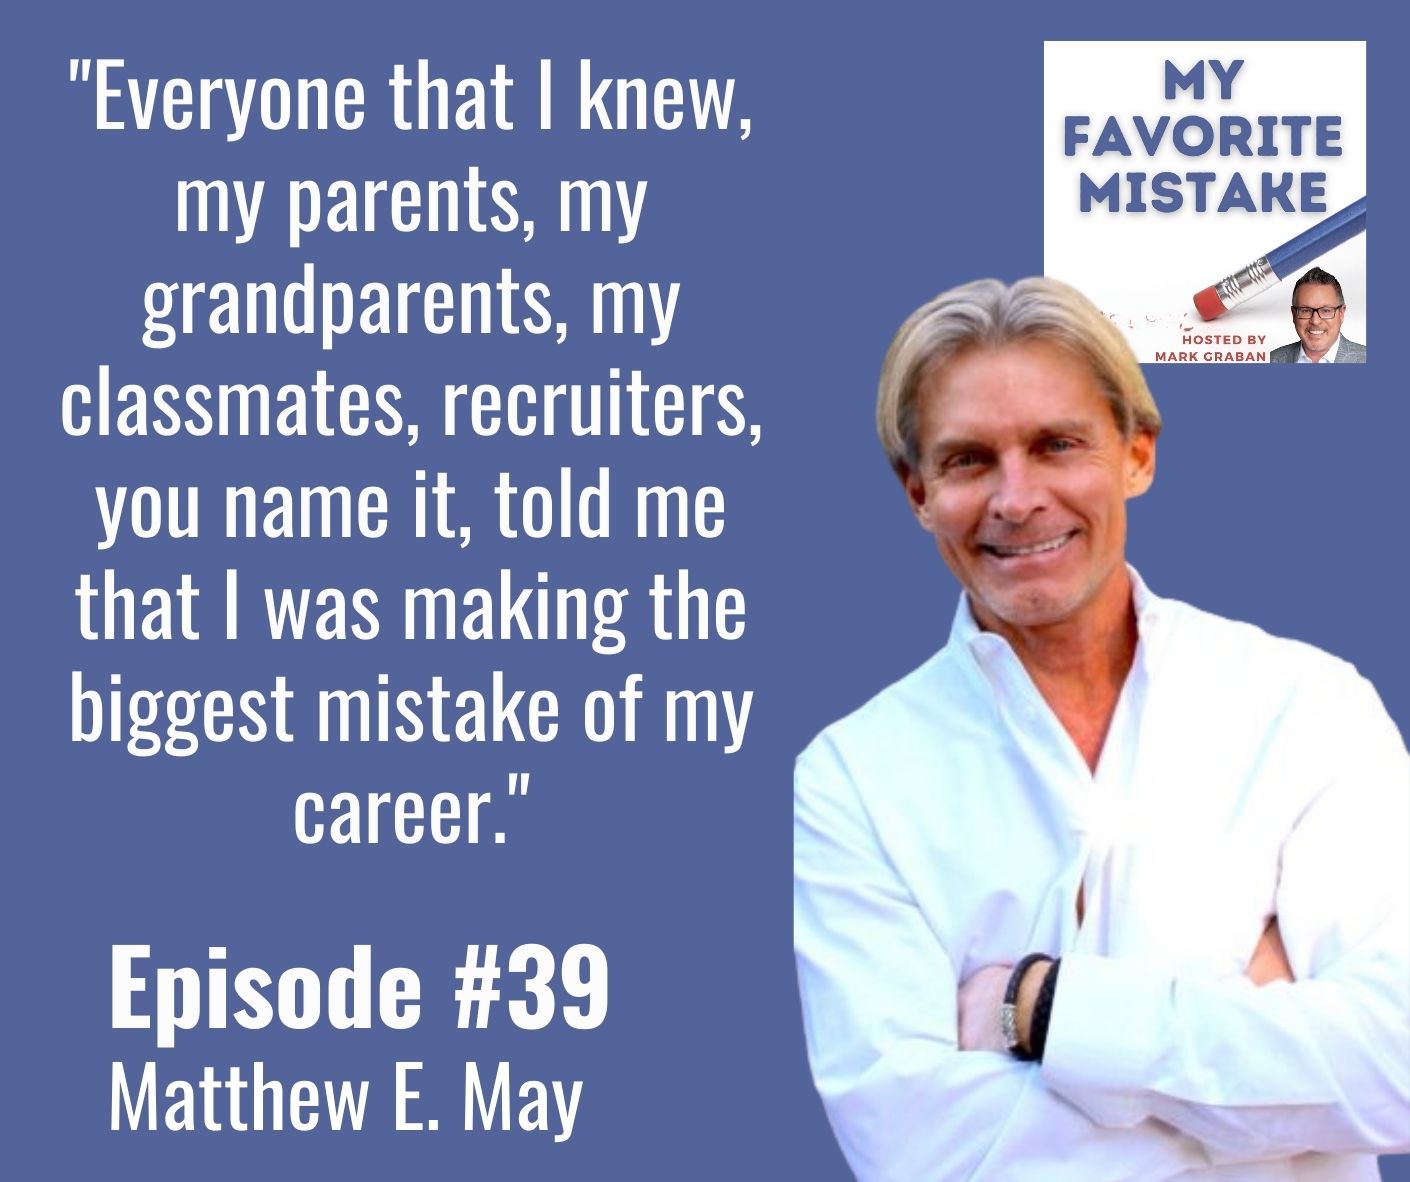 "Everyone that I knew, my parents, my grandparents, my classmates, recruiters, you name it, told me that I was making the biggest mistake of my career.